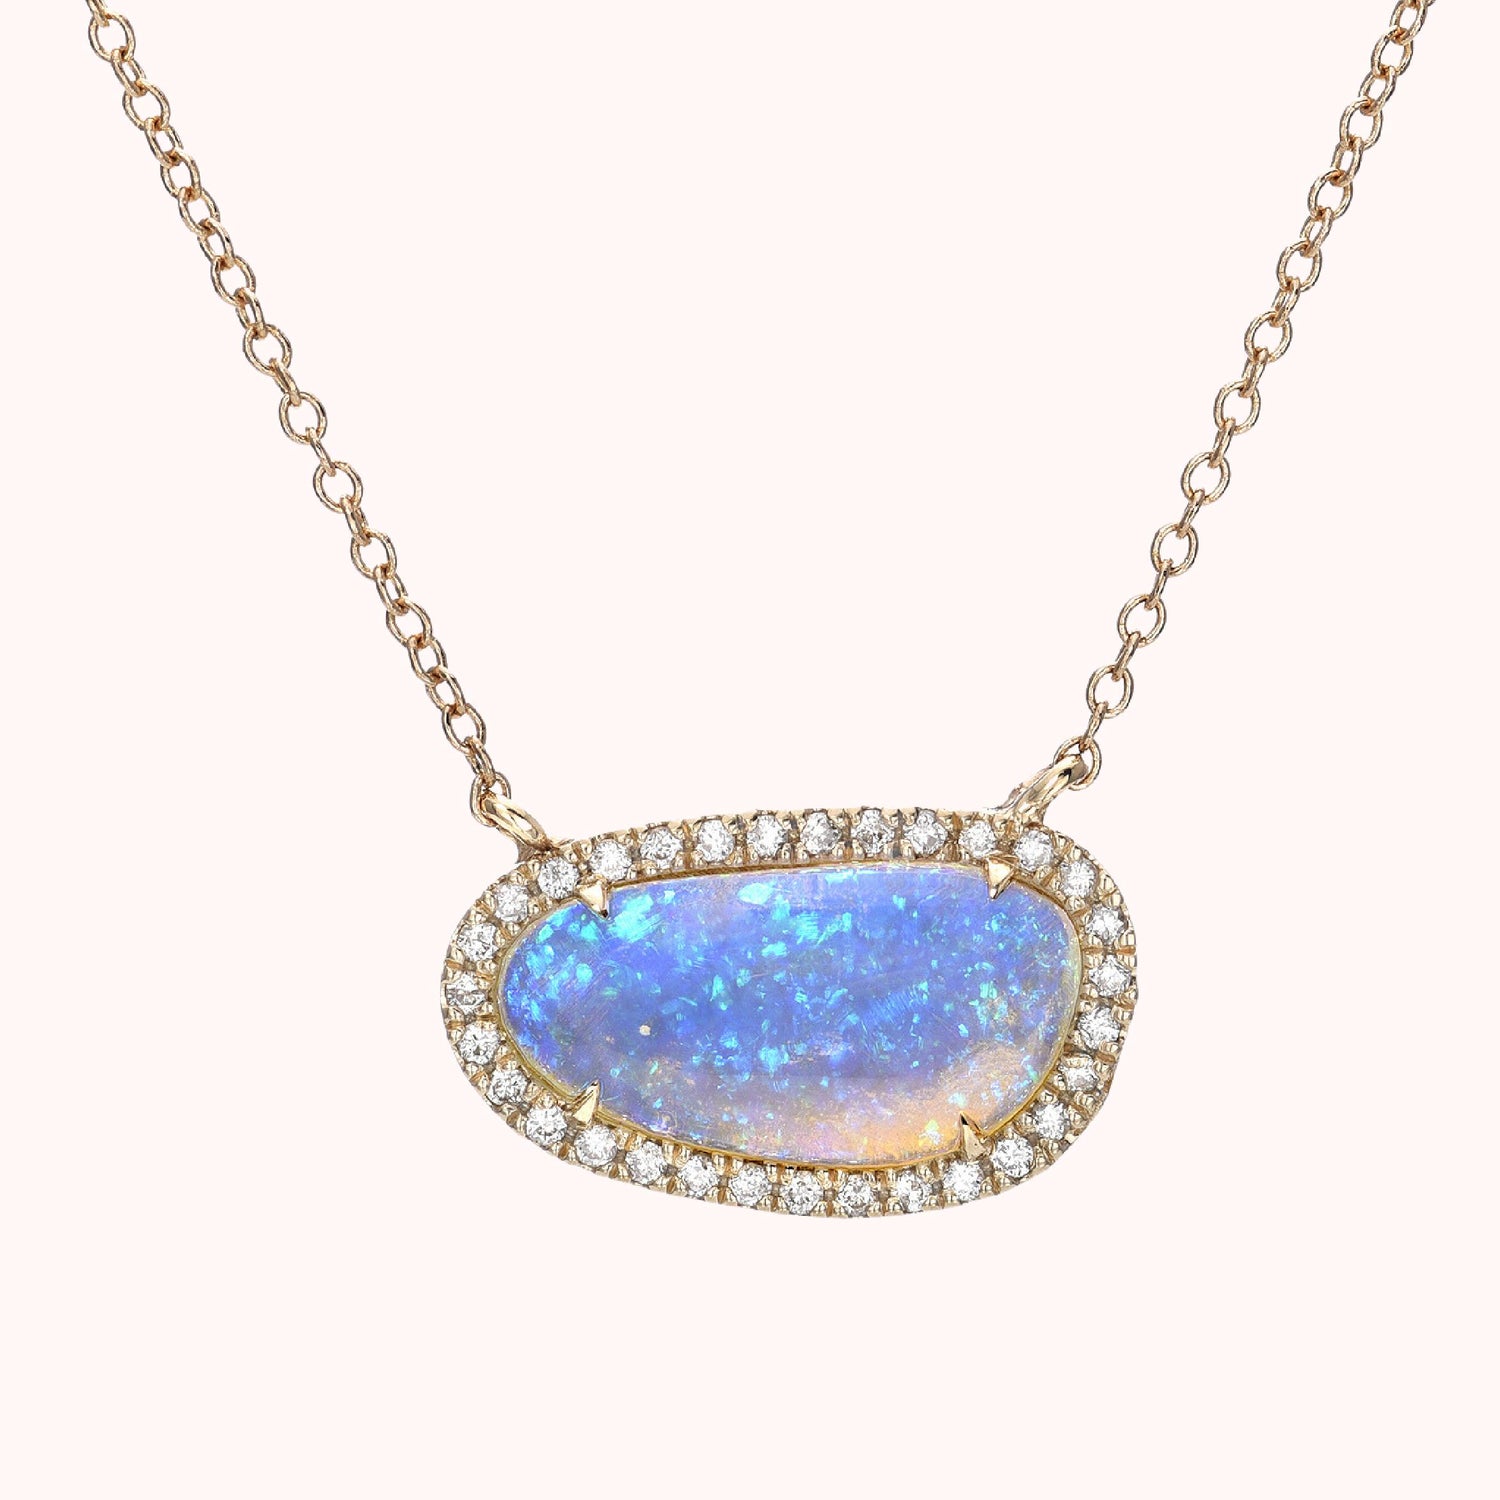 An Australian Opal Necklace by NIXIN Jewelry made in 14k gold with a Crystal Opal and pave diamond halo.